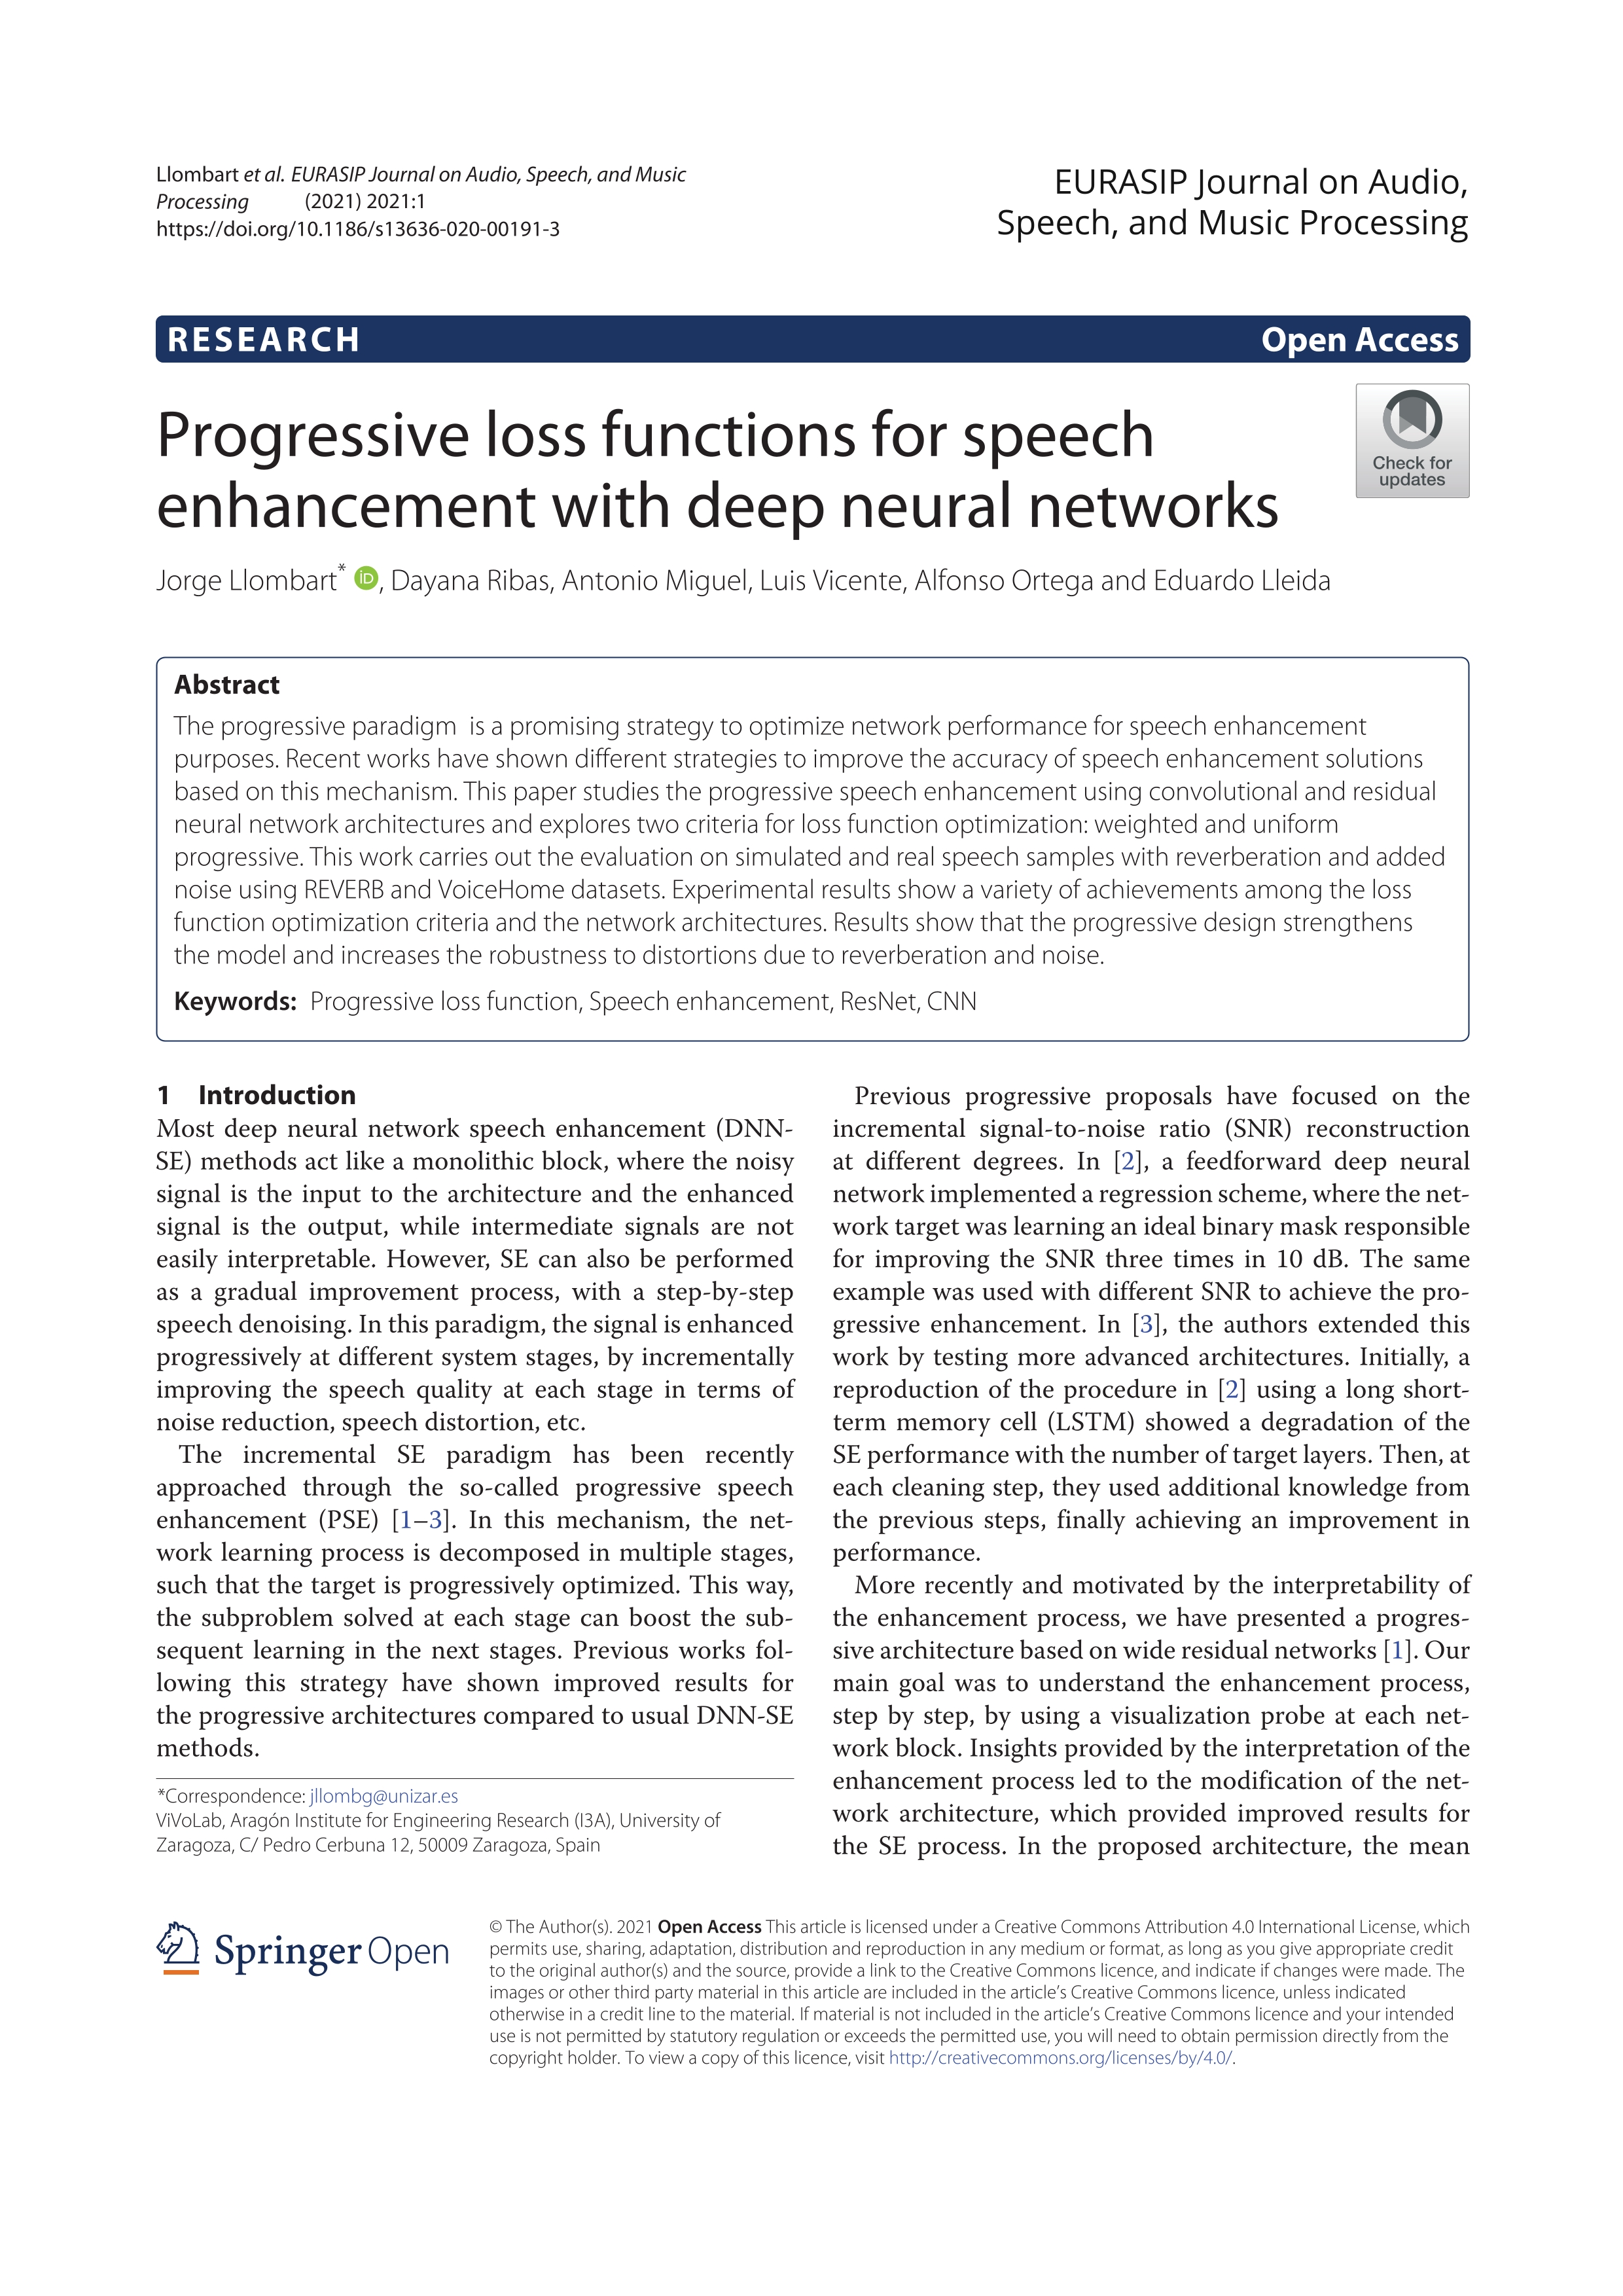 Progressive loss functions for speech enhancement with deep neural networks